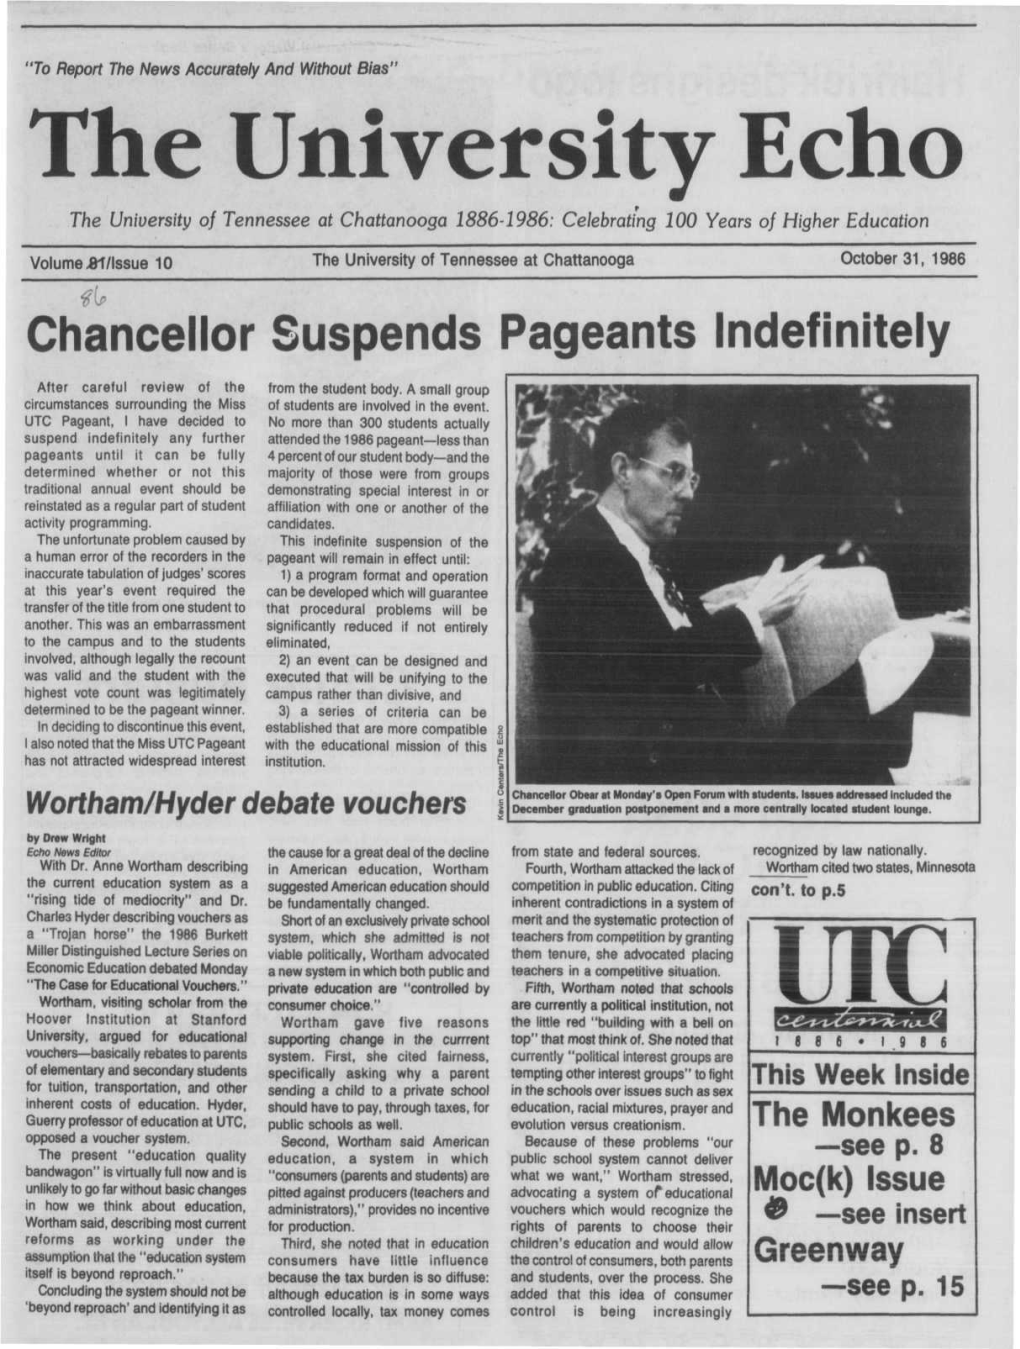 Chancellor Suspends Pageants Indefinitely